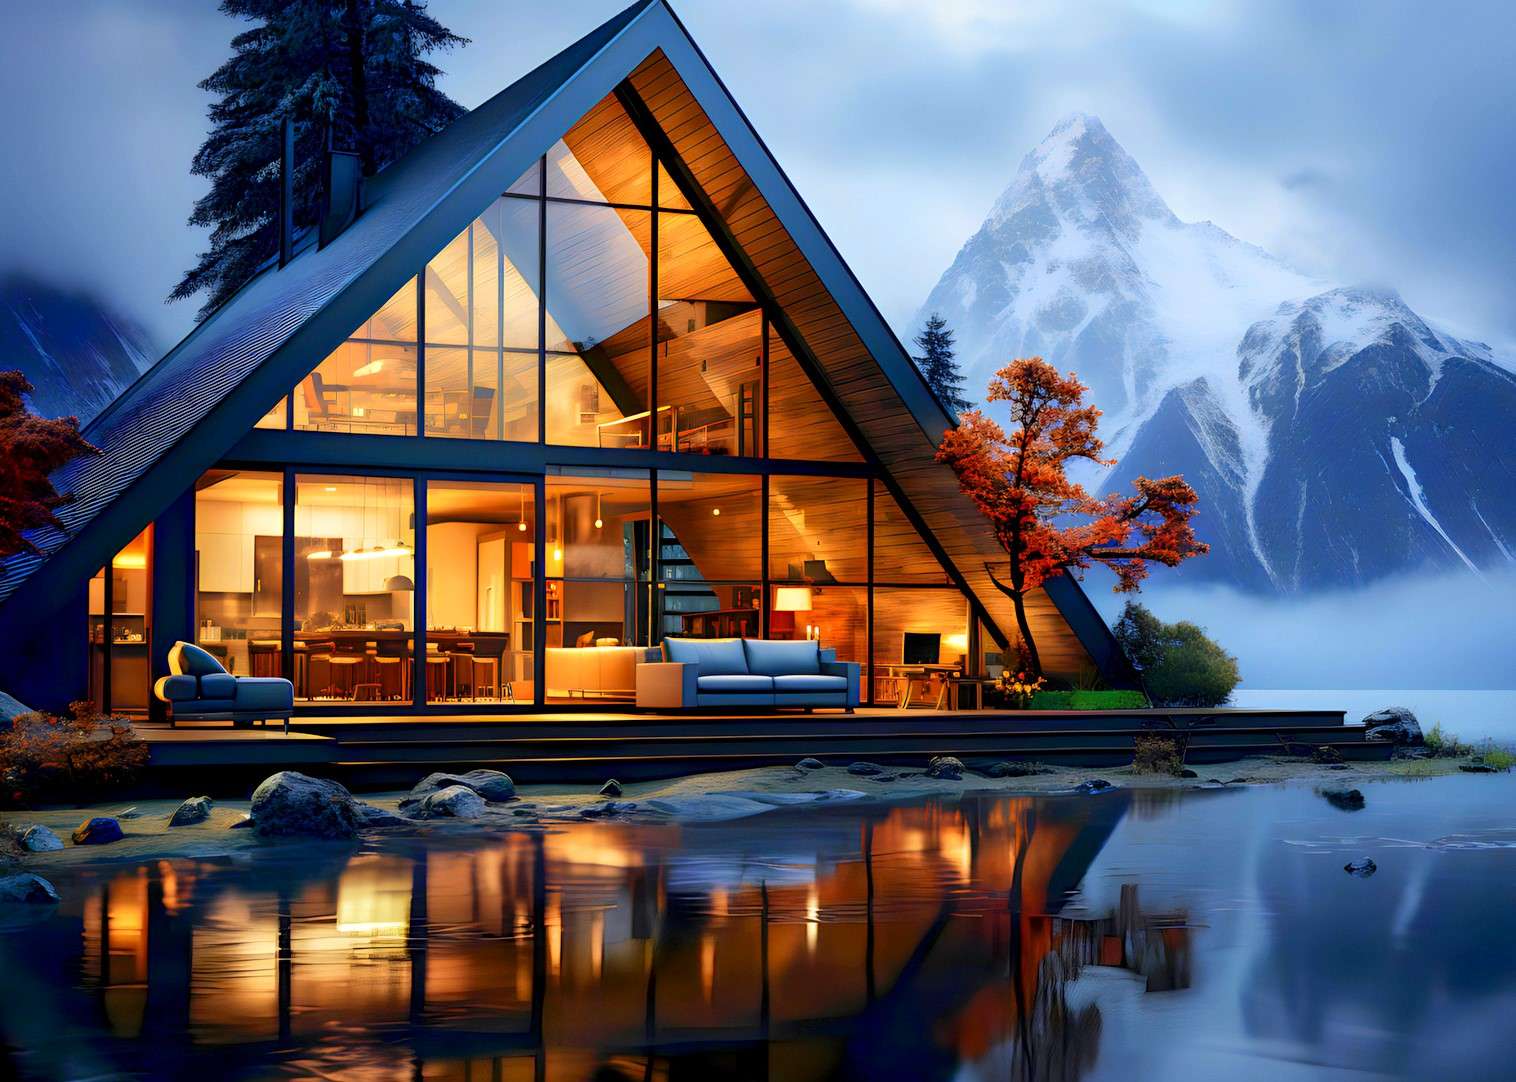 Modern villa in the mountains jigsaw puzzle online